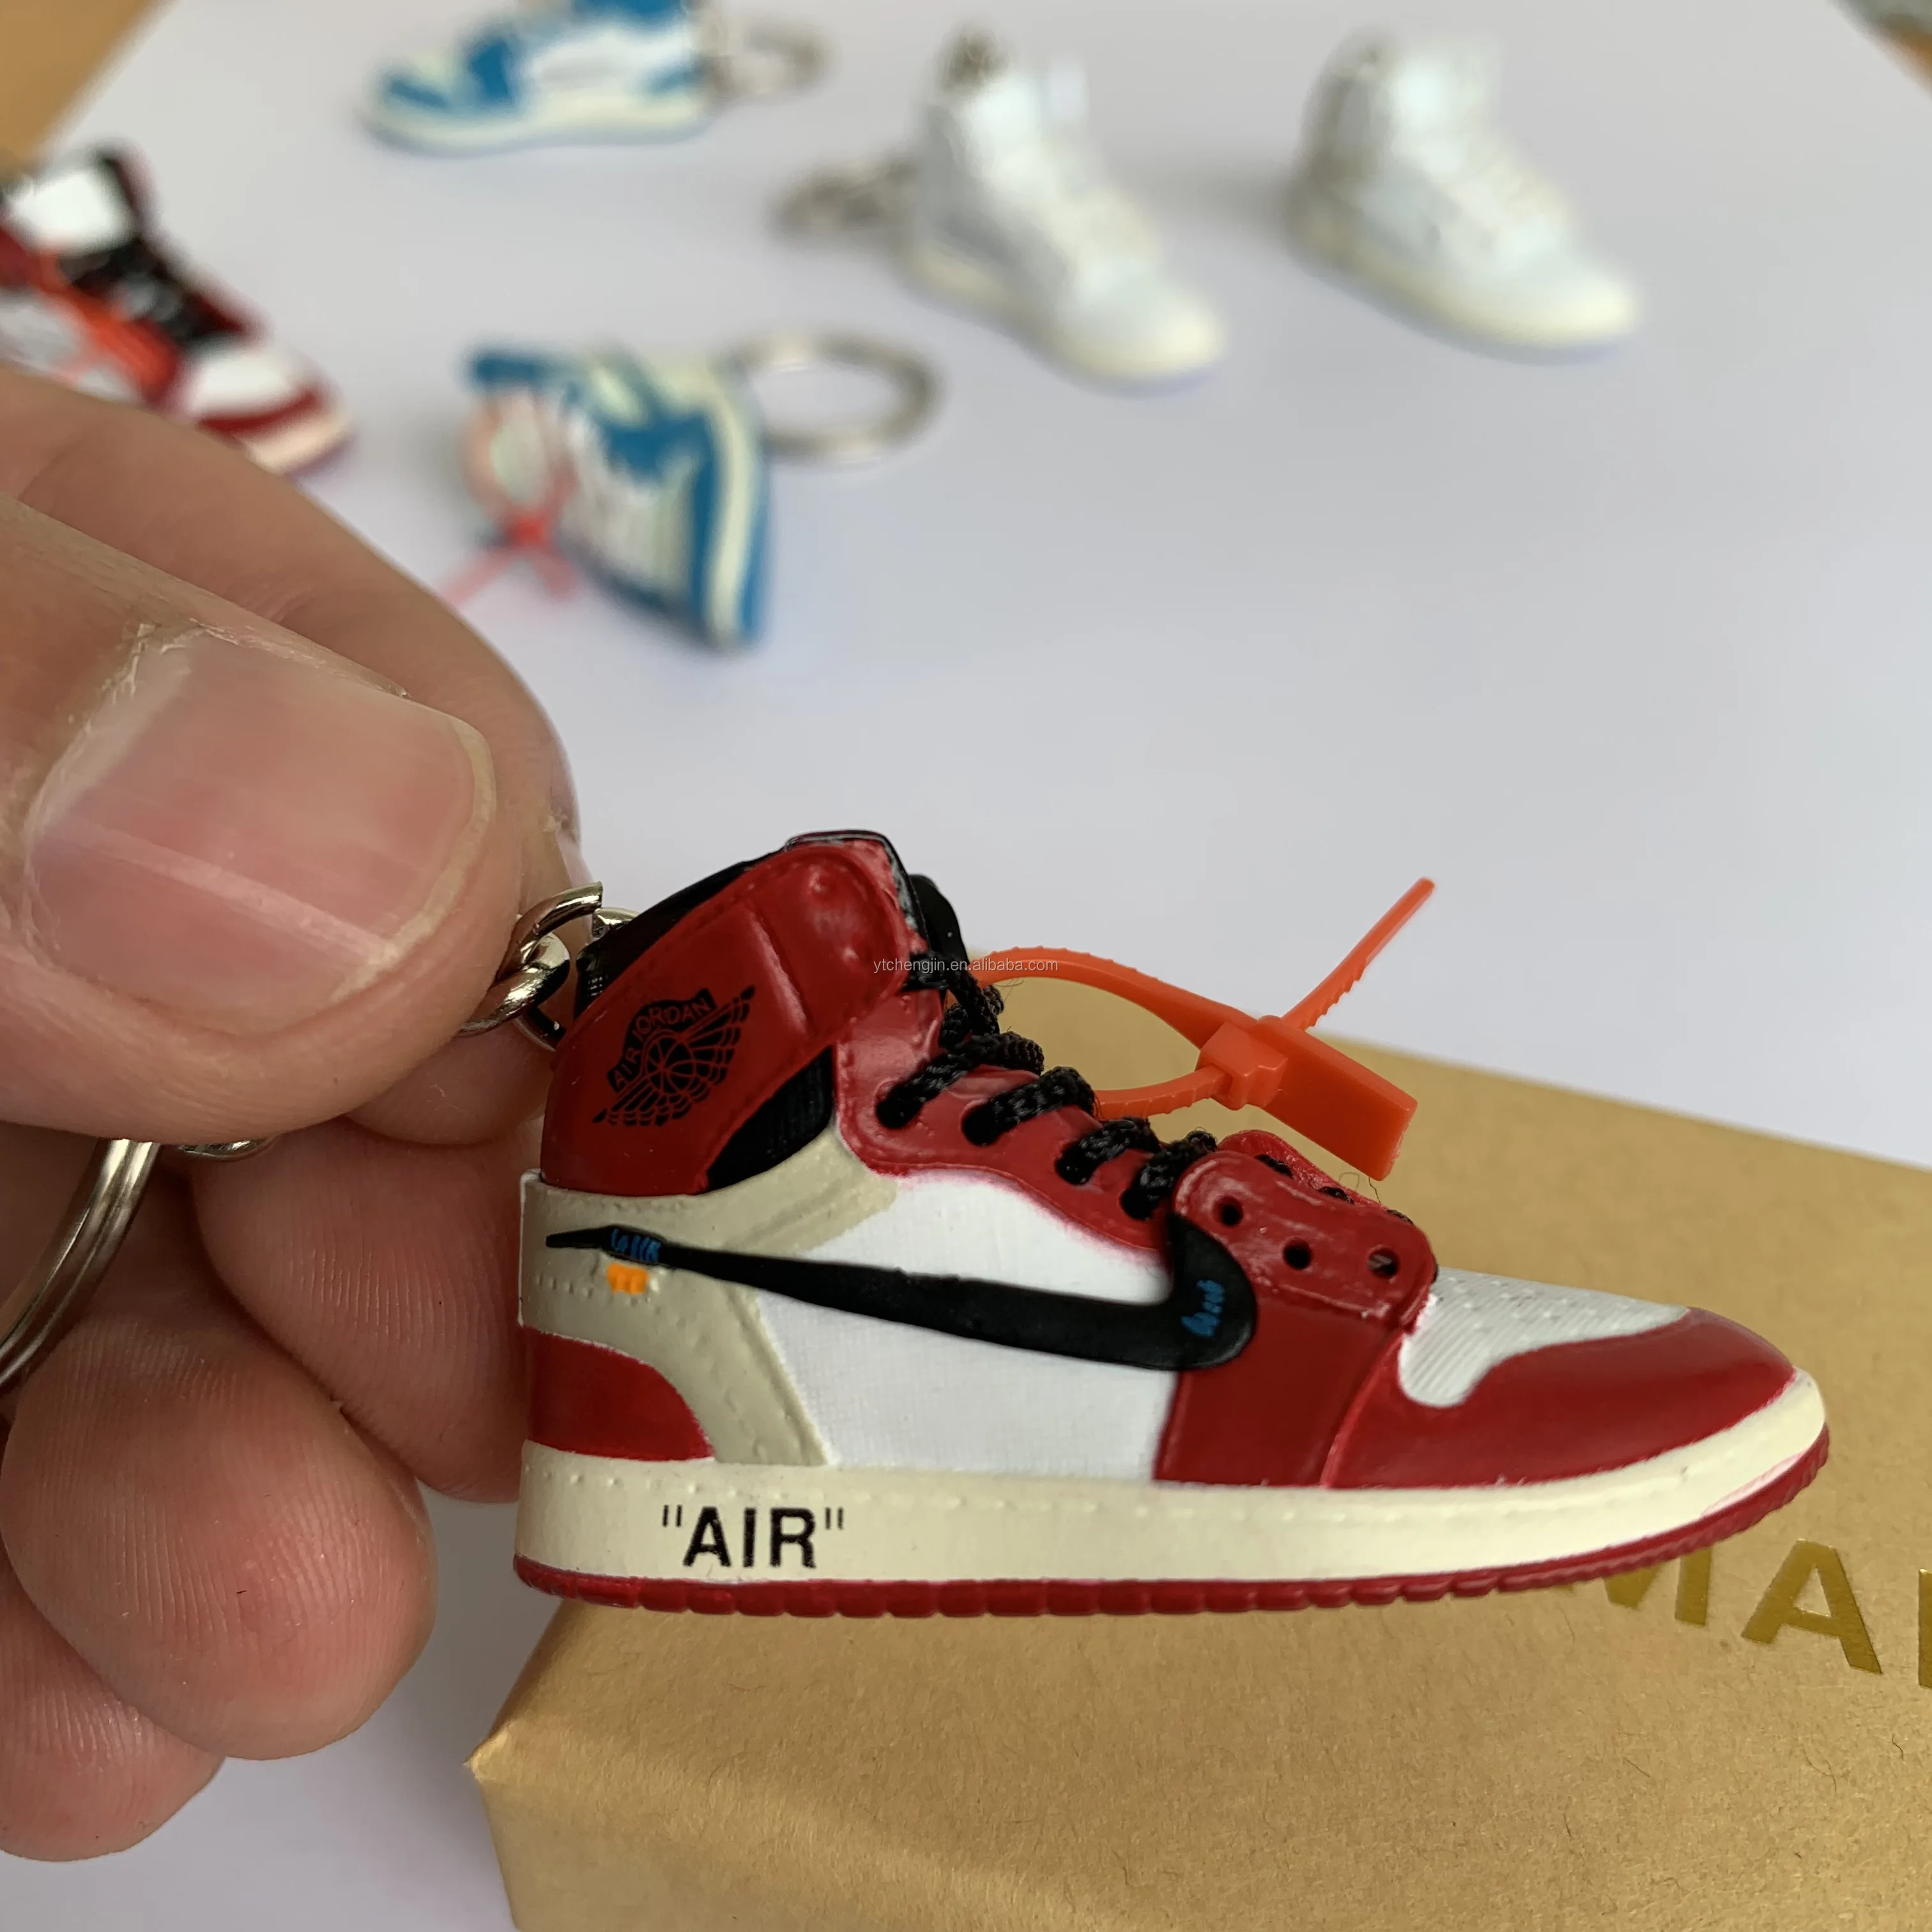 Air Jordan 1 Retro High Og Chicago Ow 3d Mini Shoes Keychains With ...